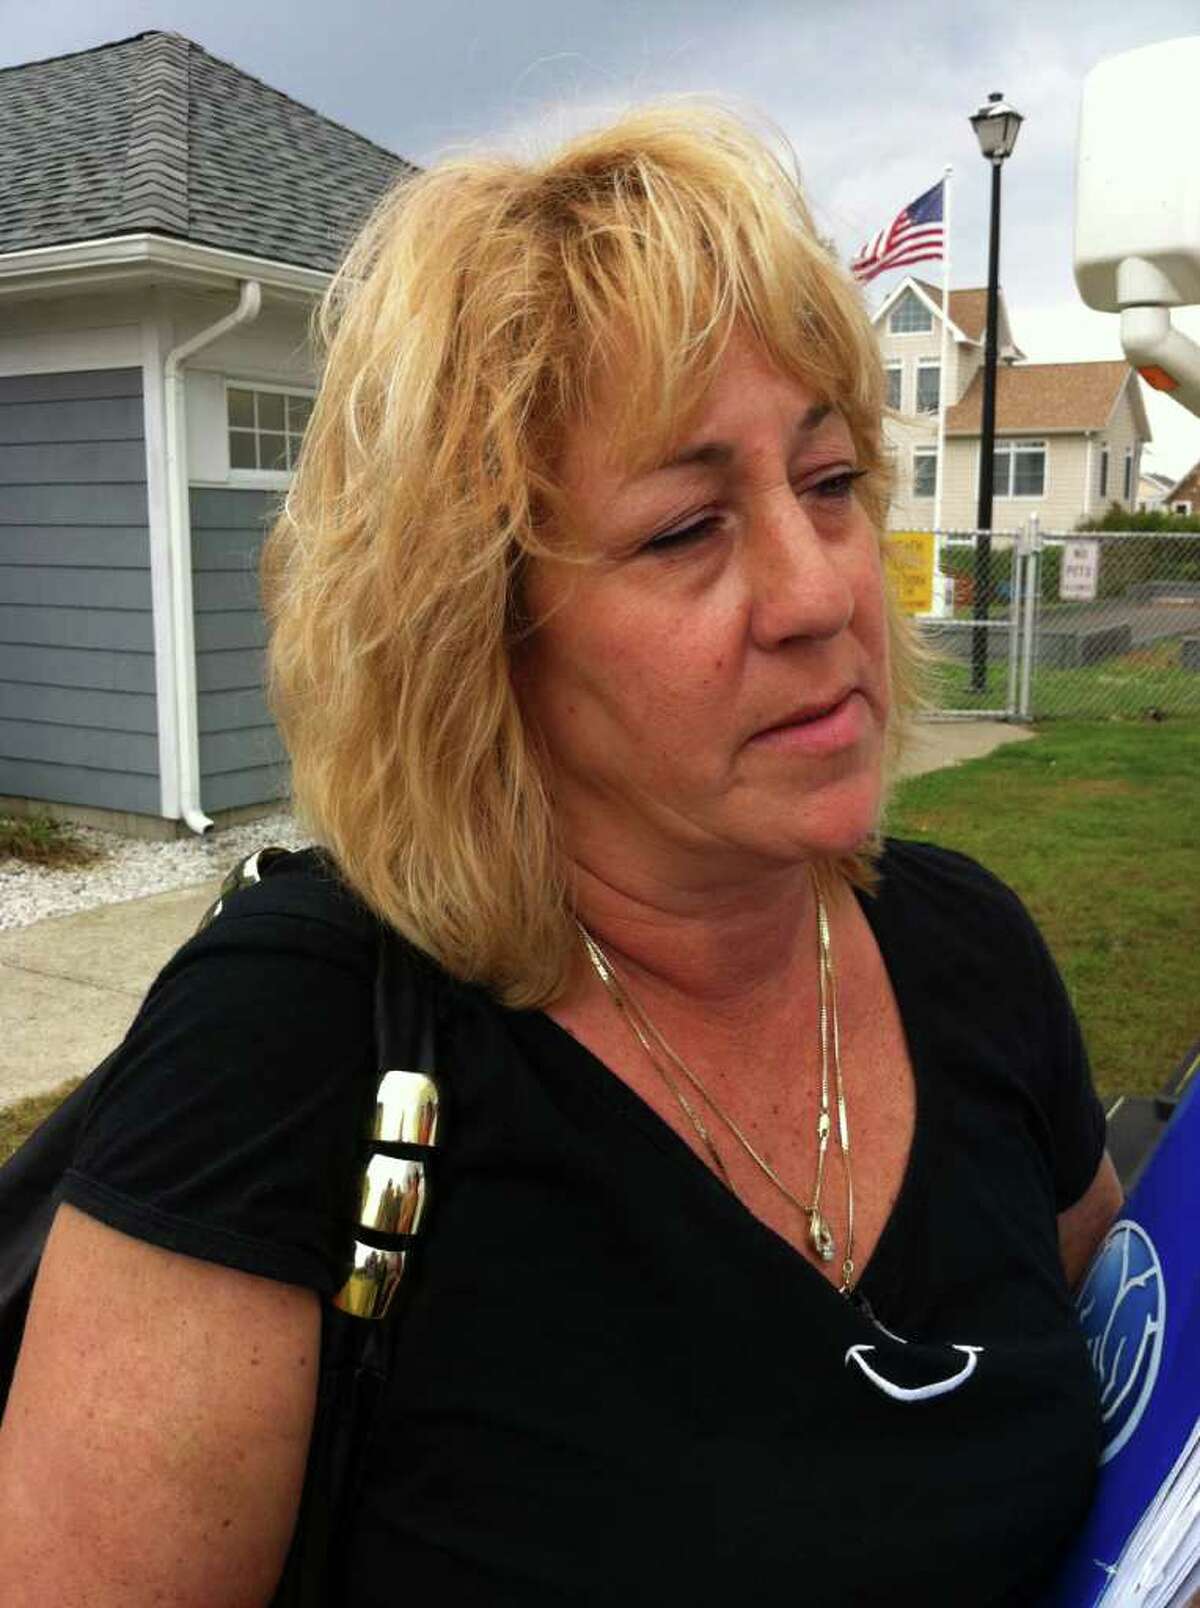 Sally Hopkins was a renter who lived some distance inland, in the center of East Haven. ìA tree fell on a line and cut the power, and when the power came back on, a surge started a fire and the house burned down,î she said while at the FEMA Disaster Recovery Center in East Haven on Thursday Sept. 15, 2011.